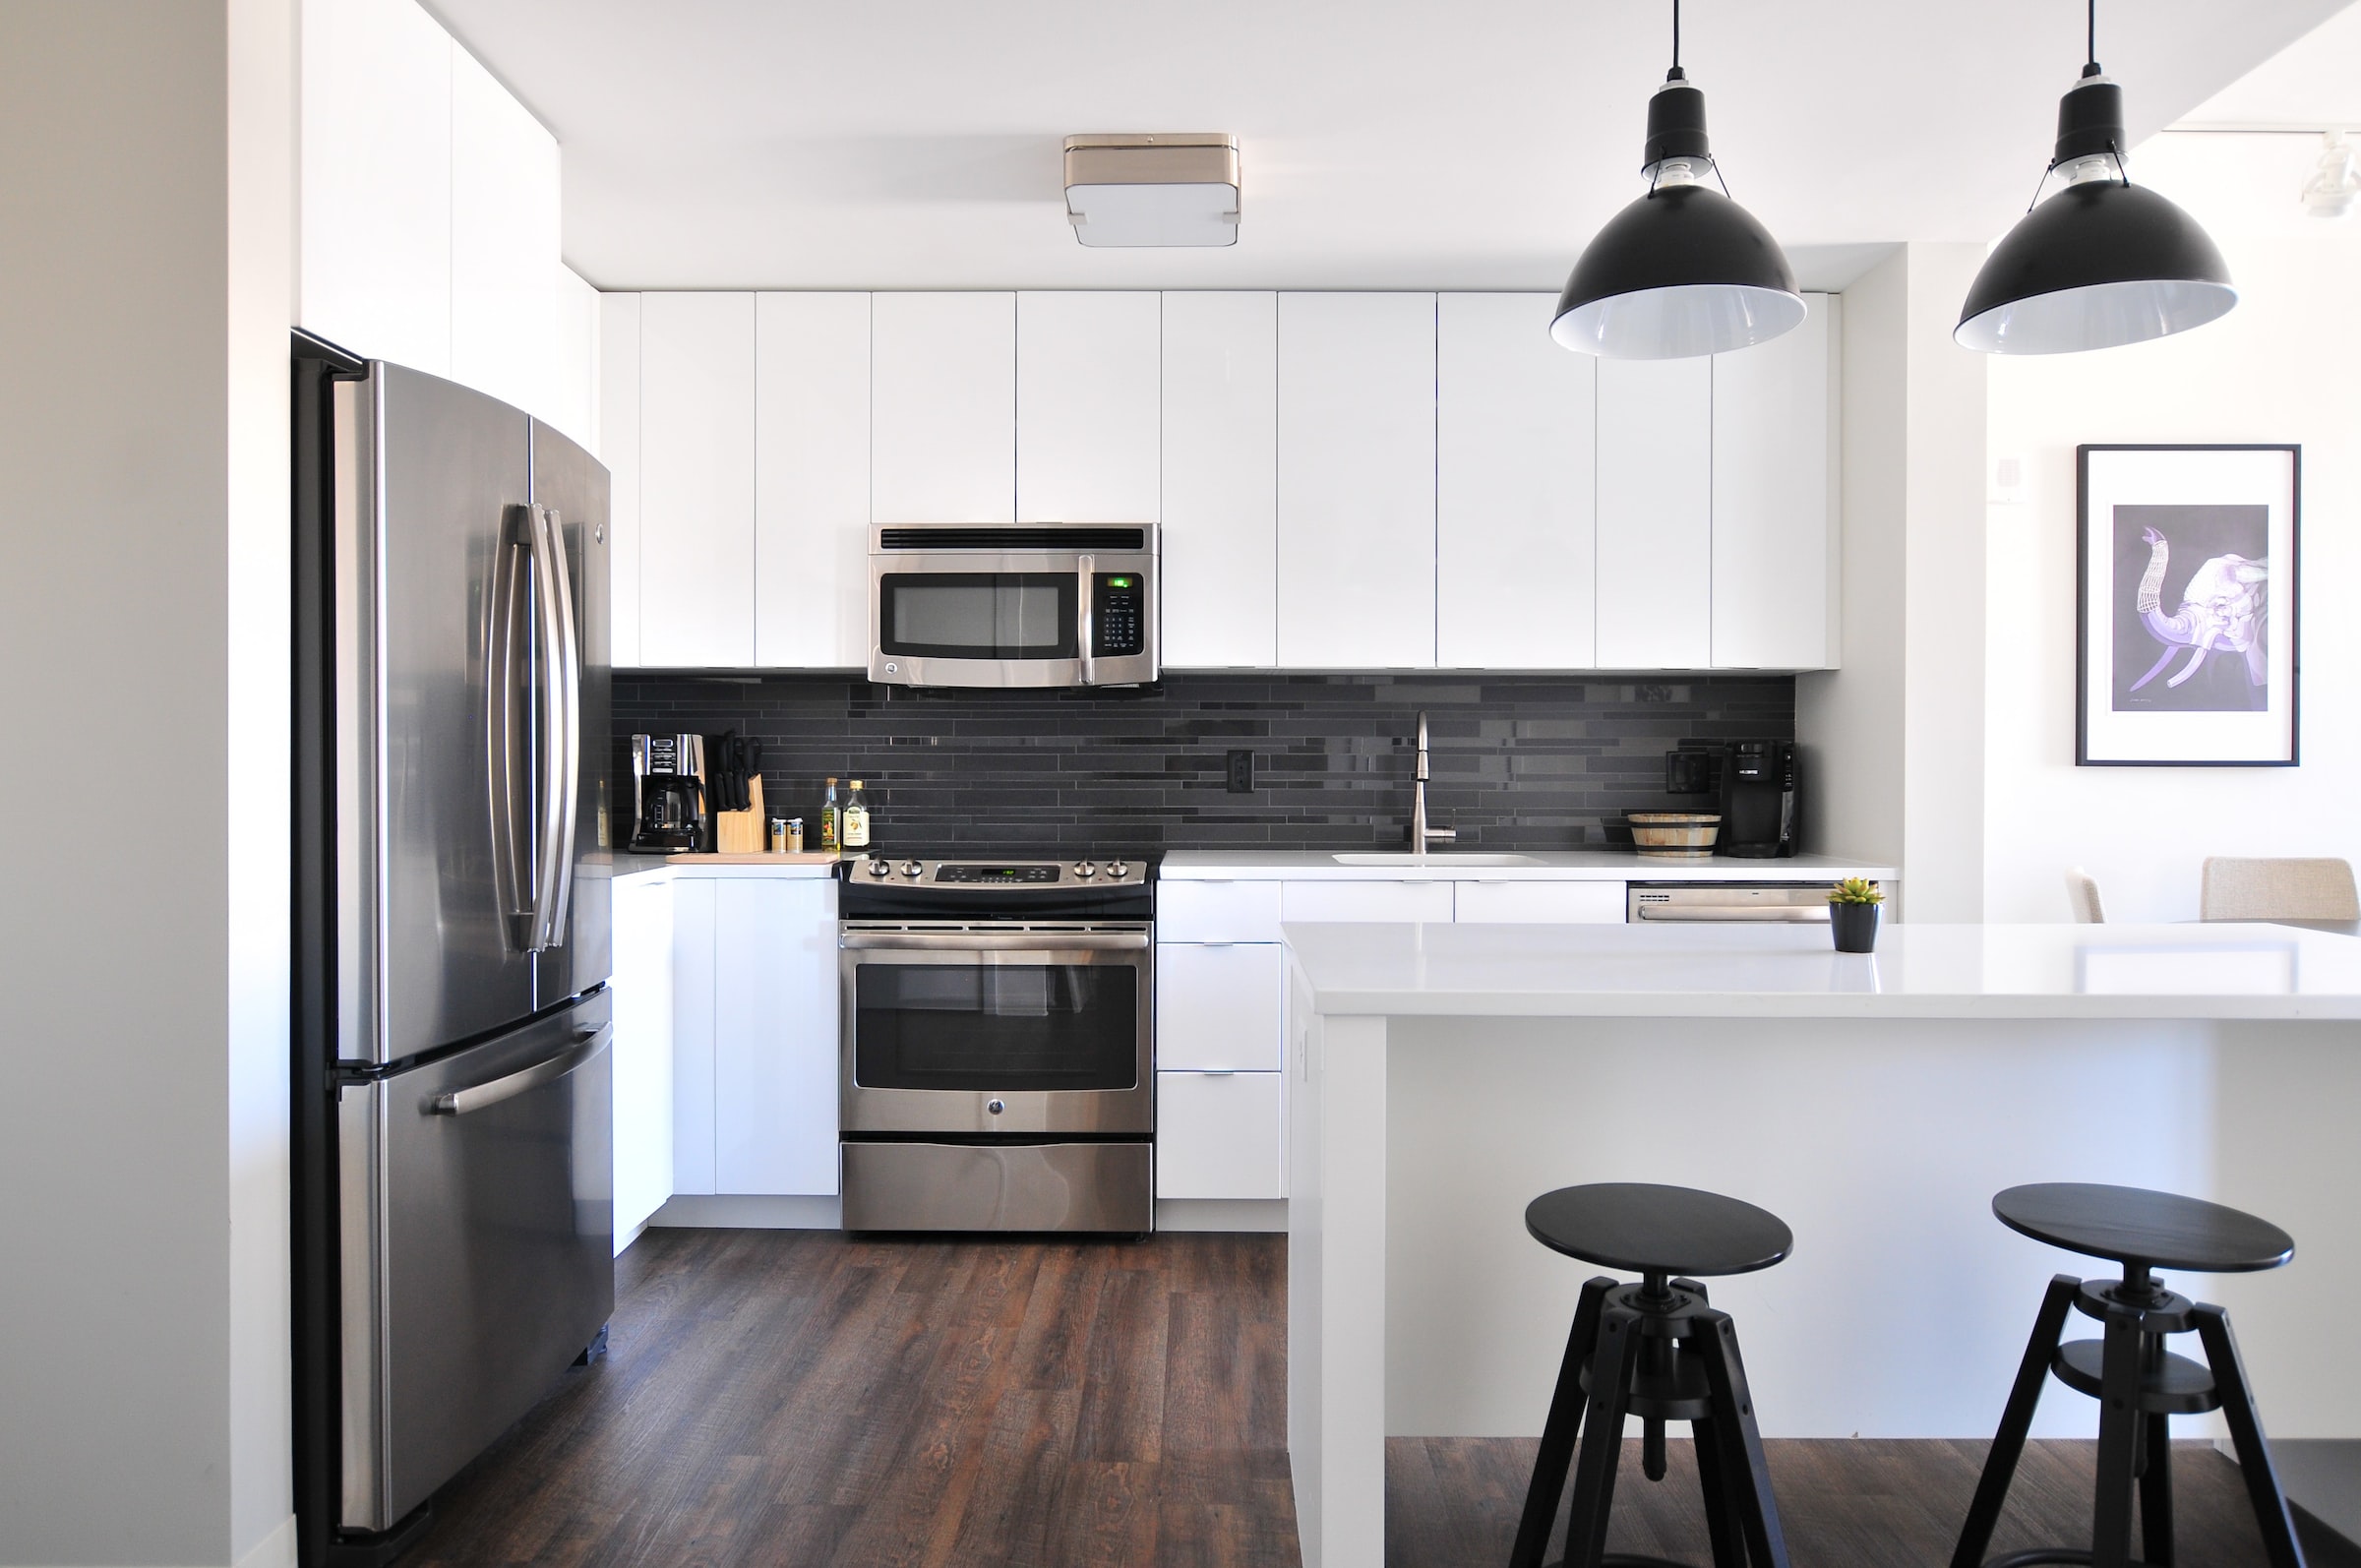 Multifamily apartment kitchen remodel with white cabinets, black pendants and stainless appliances